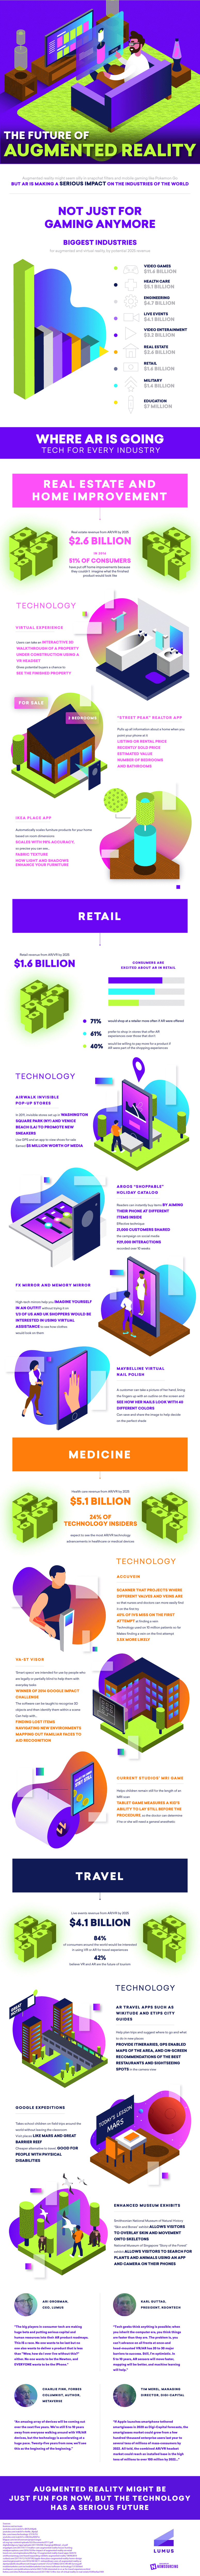 The Future of Augmented Reality (Infographic)